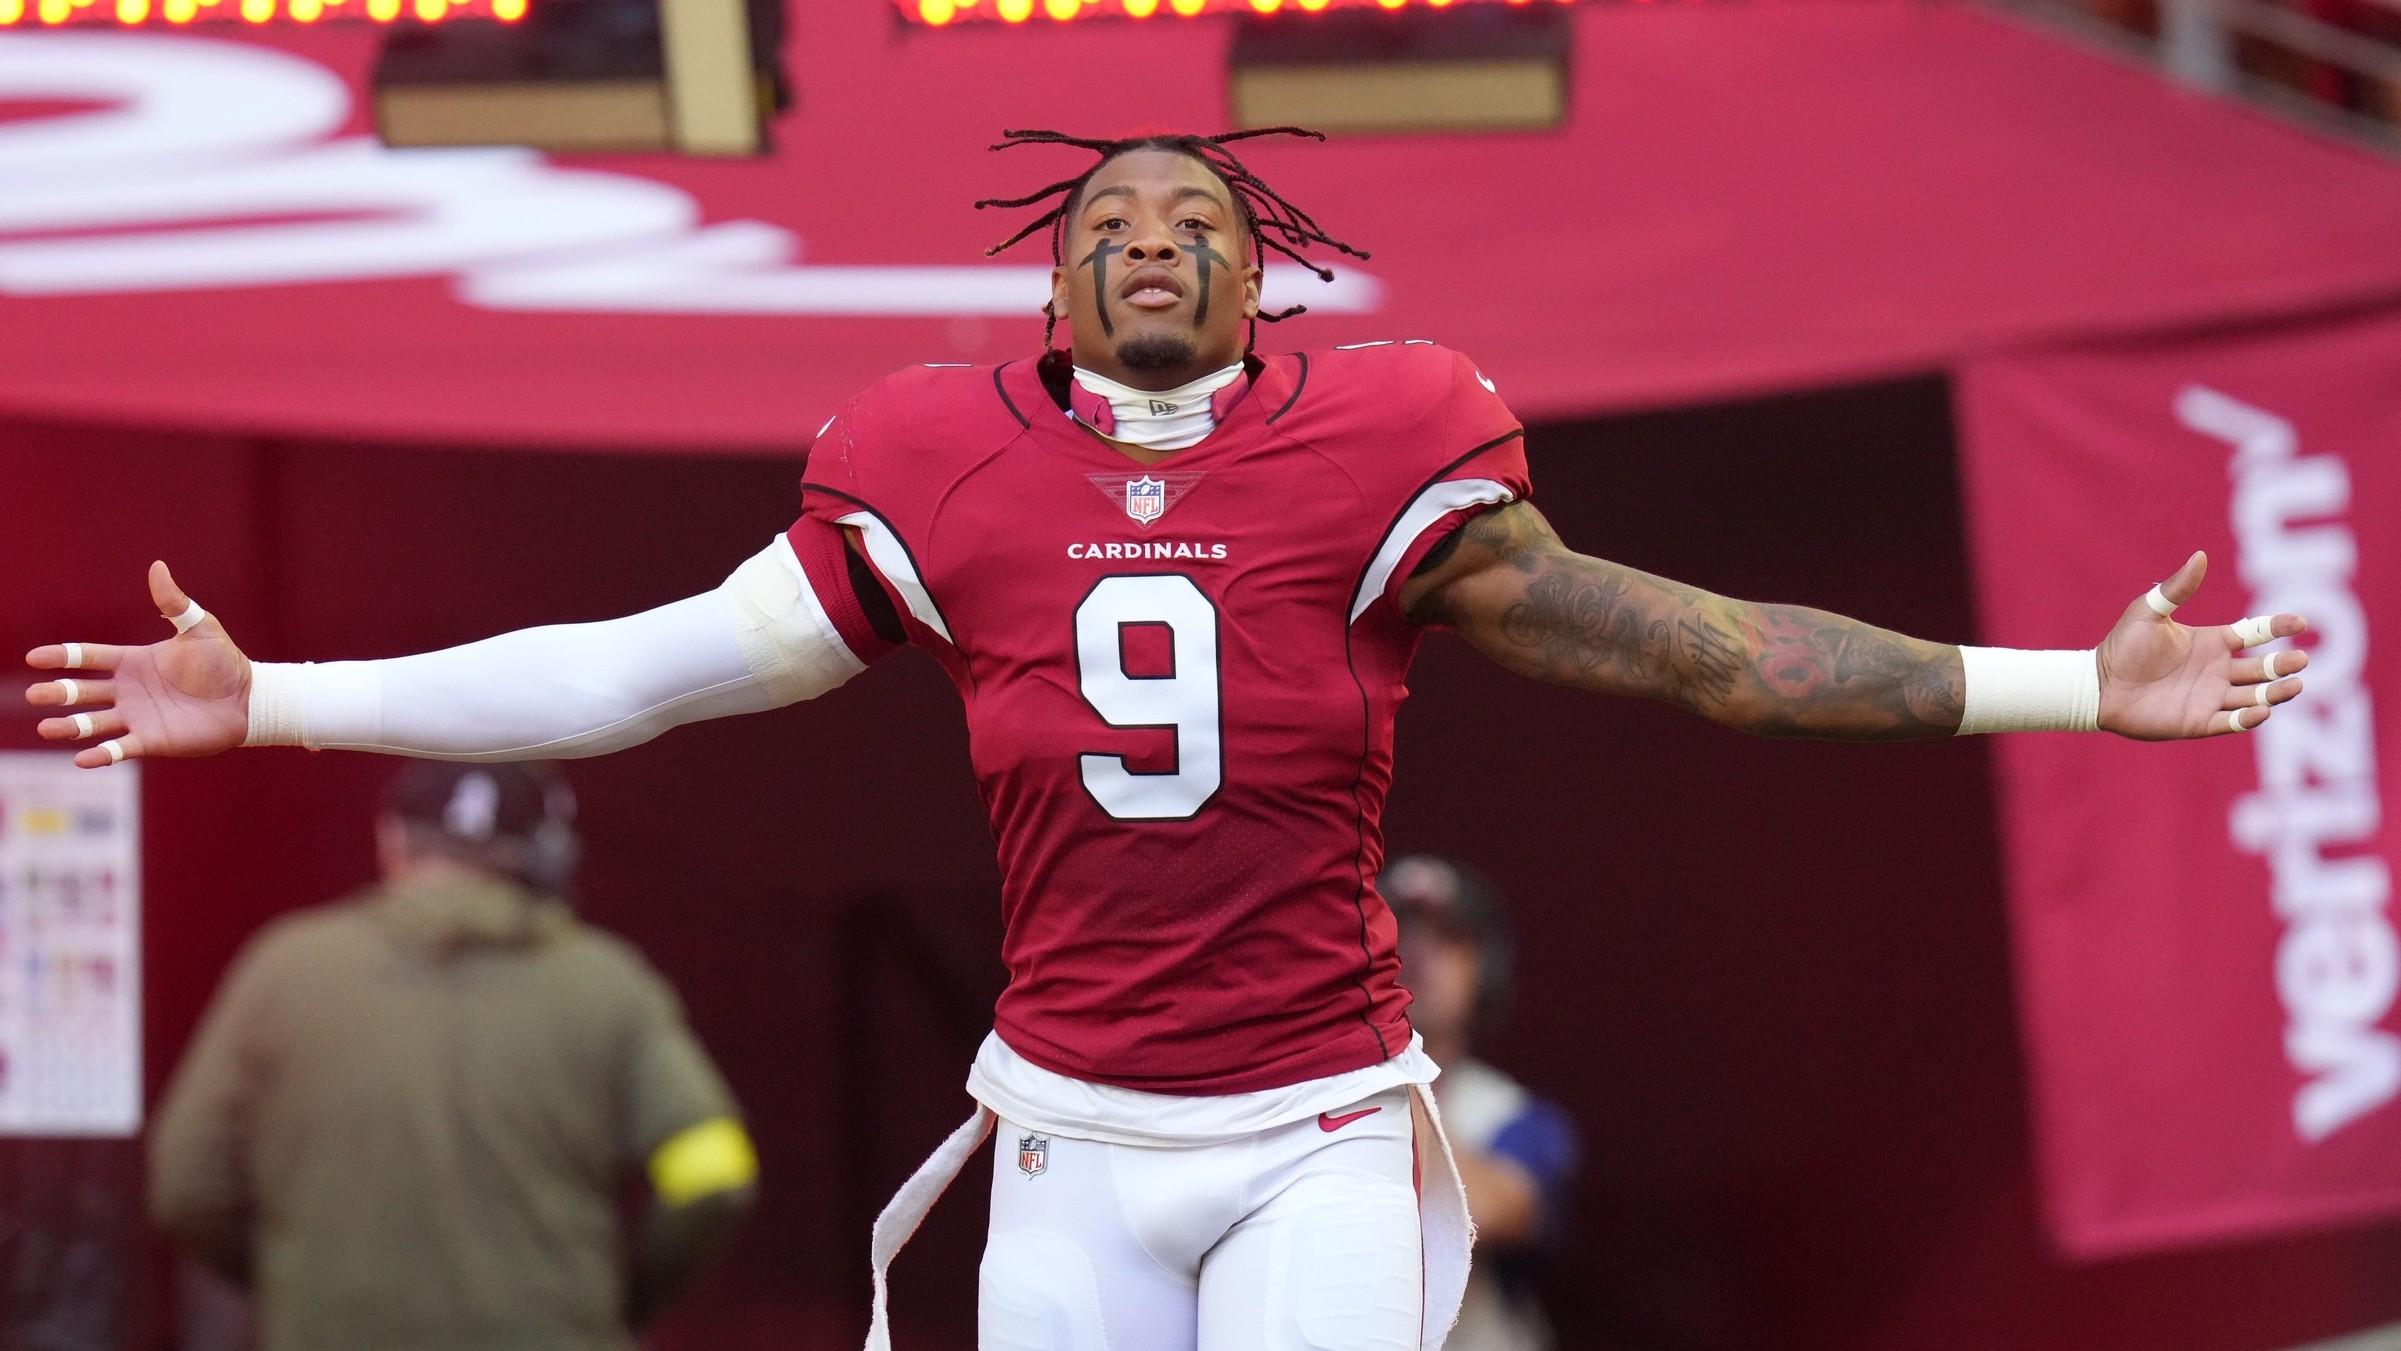 Then Arizona Cardinals linebacker Isaiah Simmons (9) is introduced before they take on the Seattle Seahawks. / Joe Rondone/The Republic / USA TODAY NETWORK